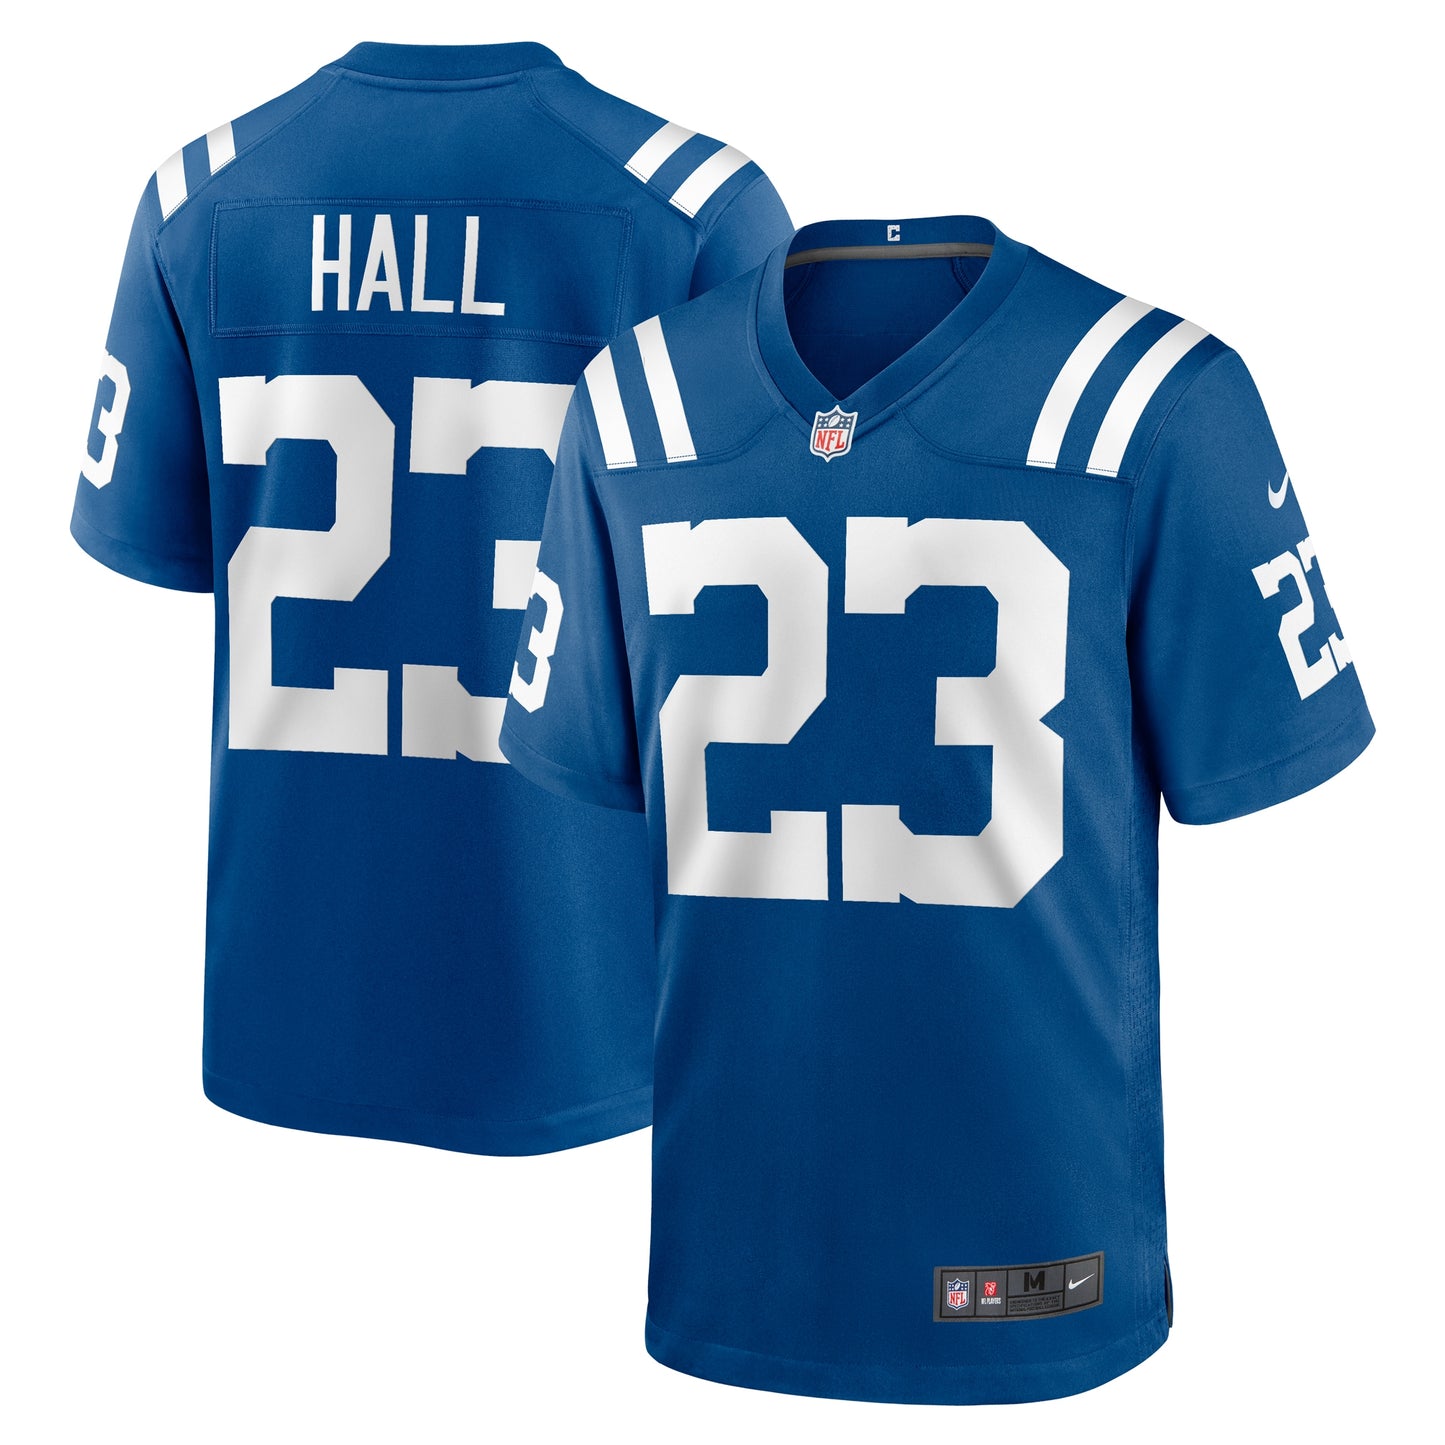 Darren Hall Indianapolis Colts Nike Team Game Jersey - Royal